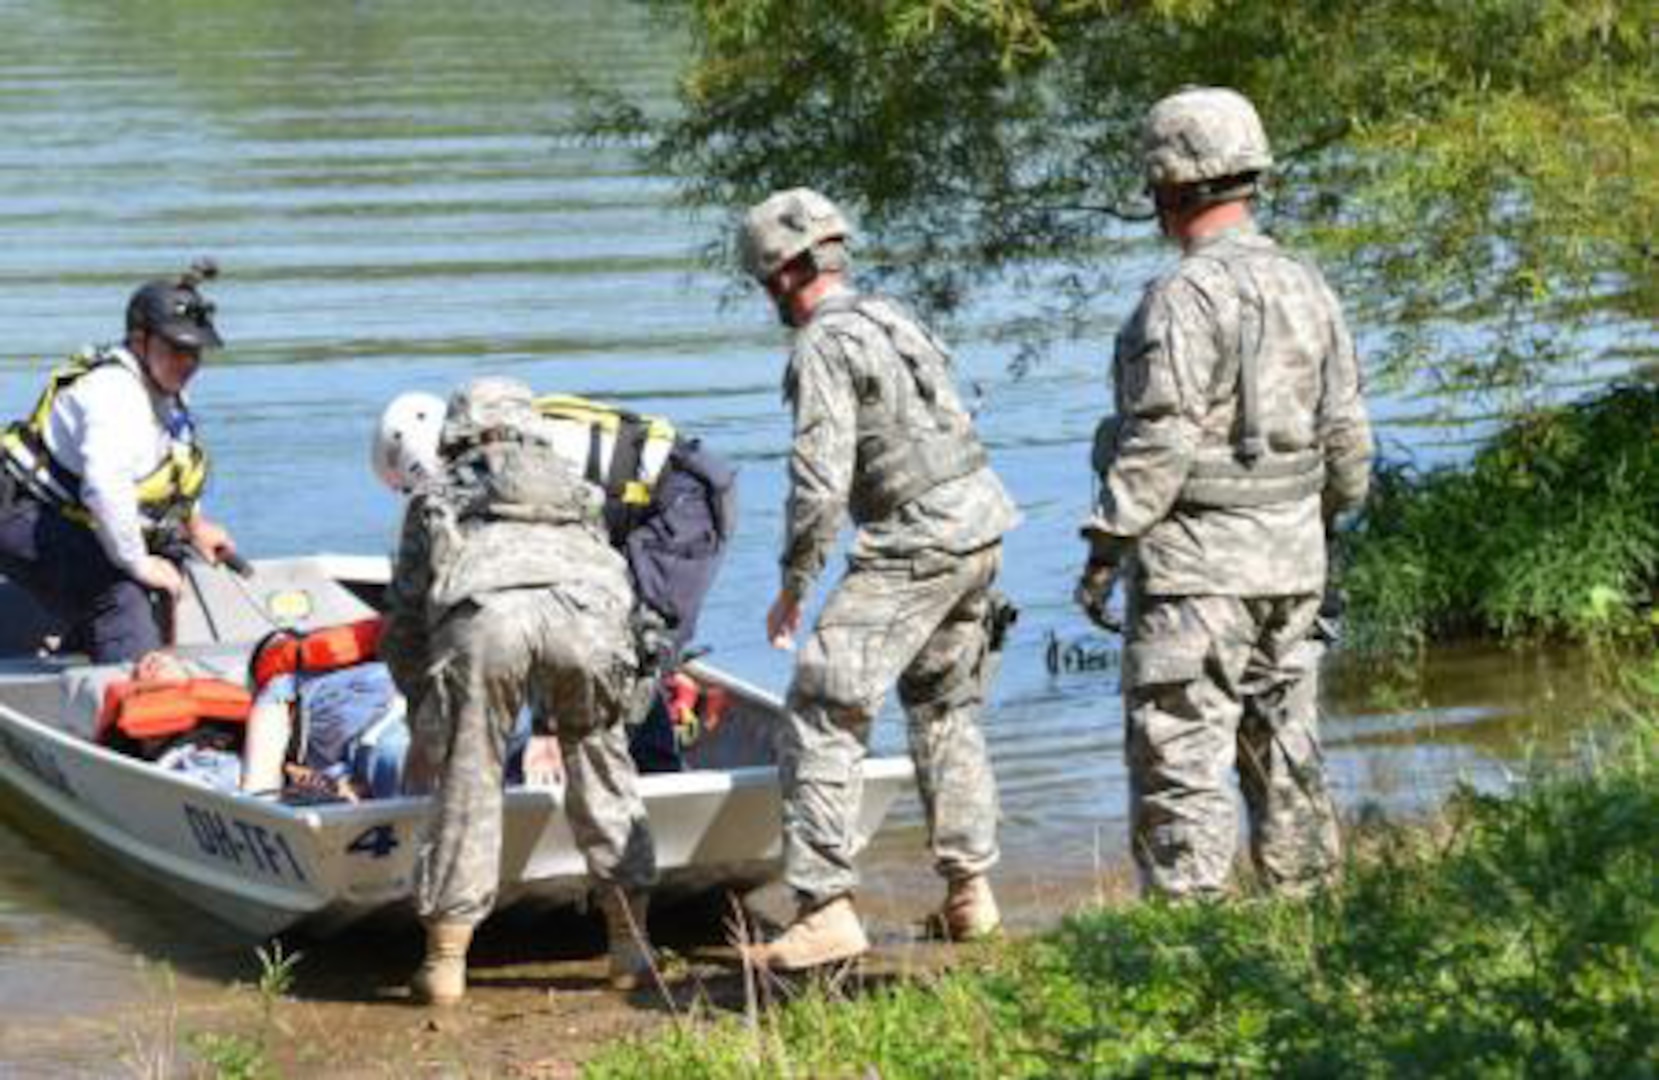 Brian Harting, a rescue team member from Task Force 1, Ohio's Federal Emergency Management Team, prepares to deliver a simulated casualty to a litter team of Soldiers from the 381st Military Police Company, Indiana National Guard, Brush Creek Reservoir in Butlerville, Ind., near Muscatatuck Urban Training Center, Aug. 4, 2014. The Vibrant Response 14 exercise tests the abilities of multiple agencies to respond in the event of an actual chemical, biological, radioactive or nuclear incident or other emergencies. 